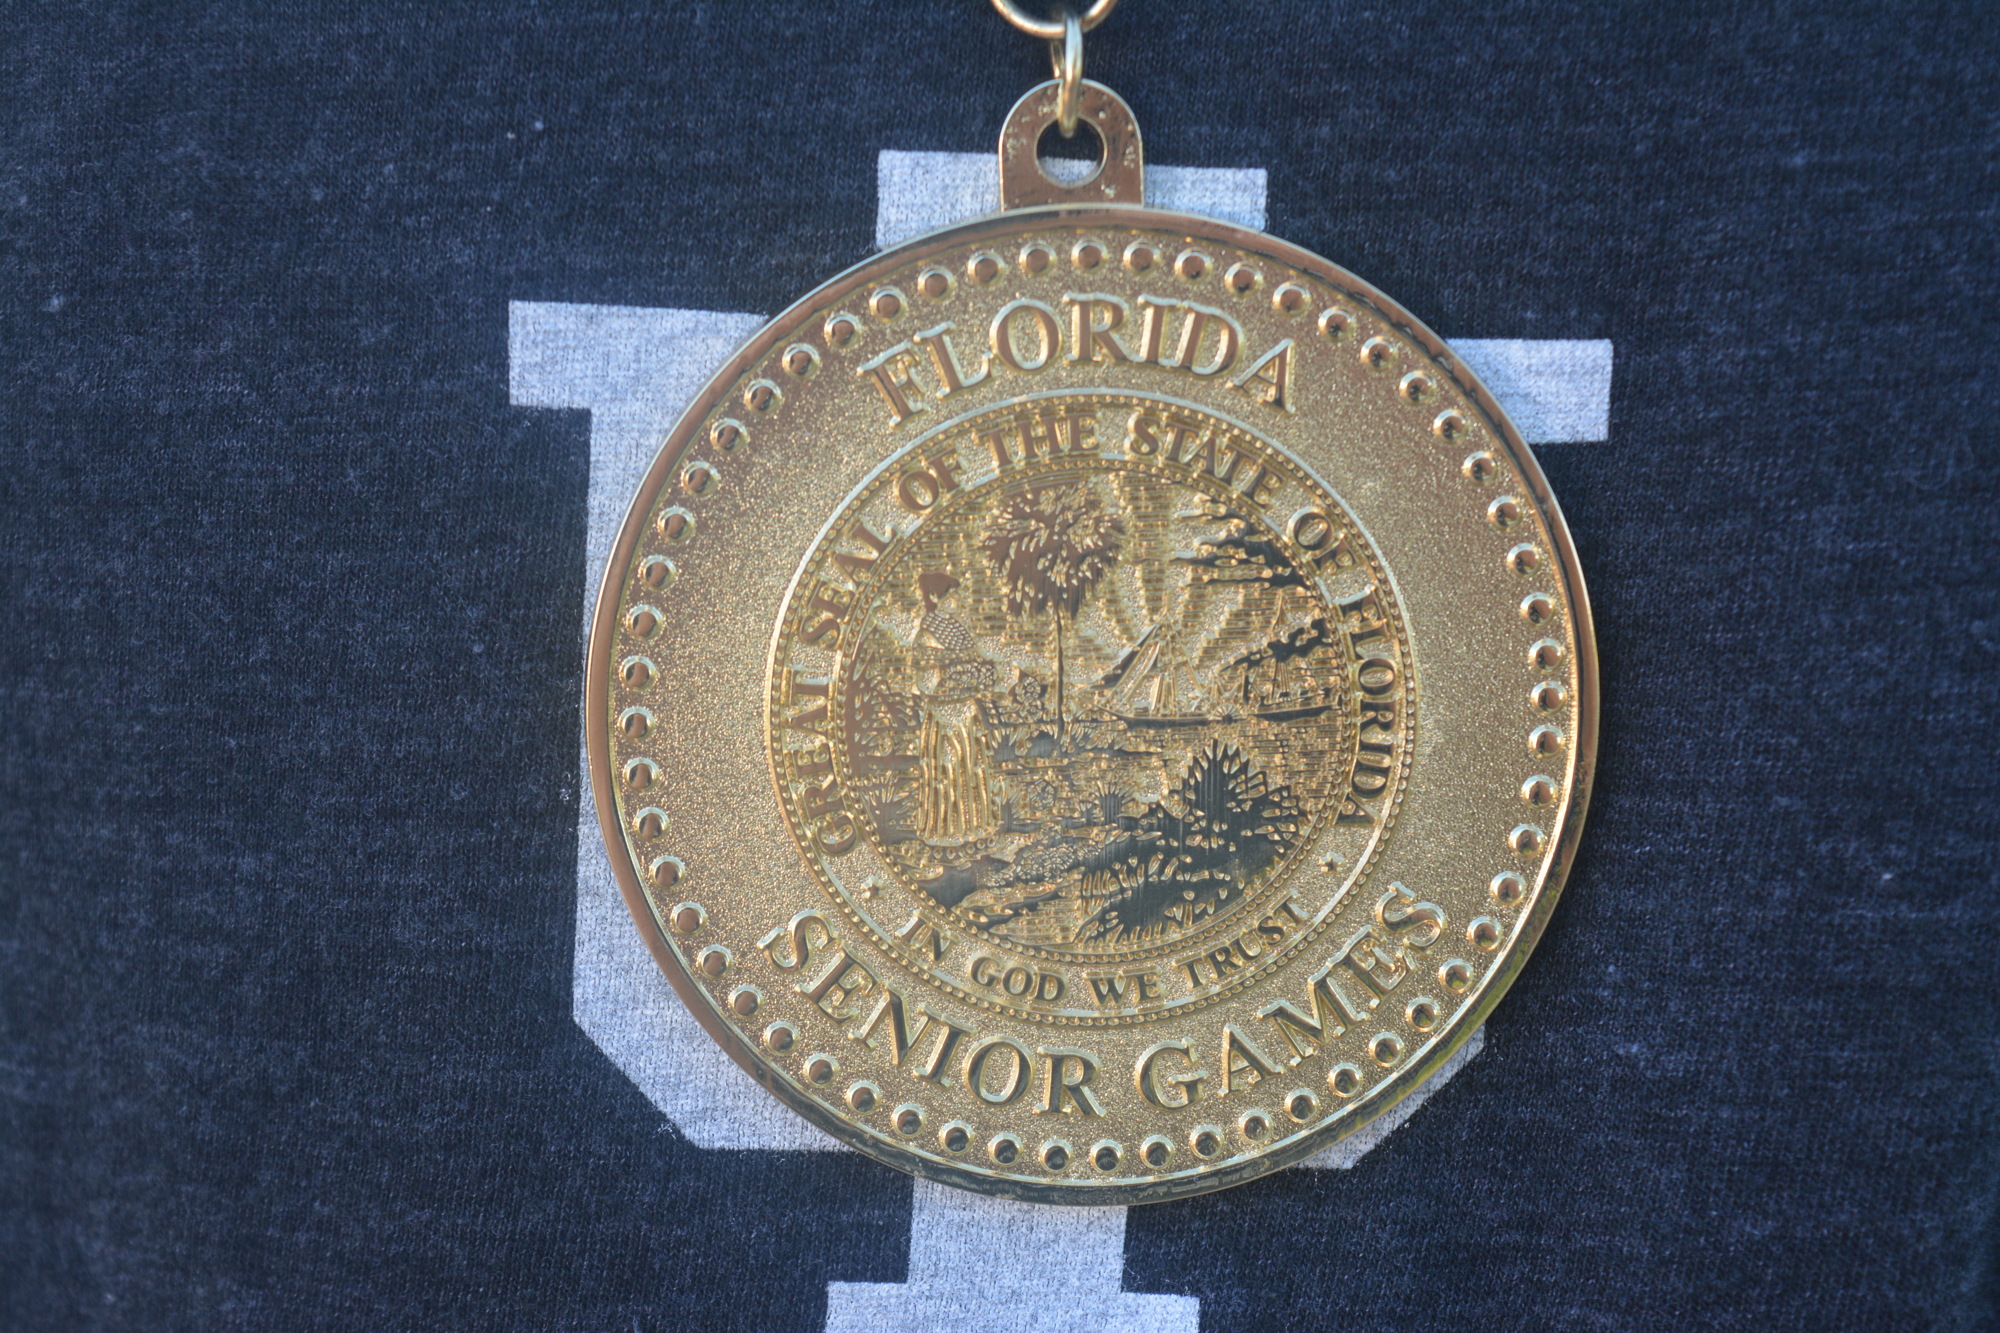 A close-up of Stan Edelson's Florida Senior Games gold medal.